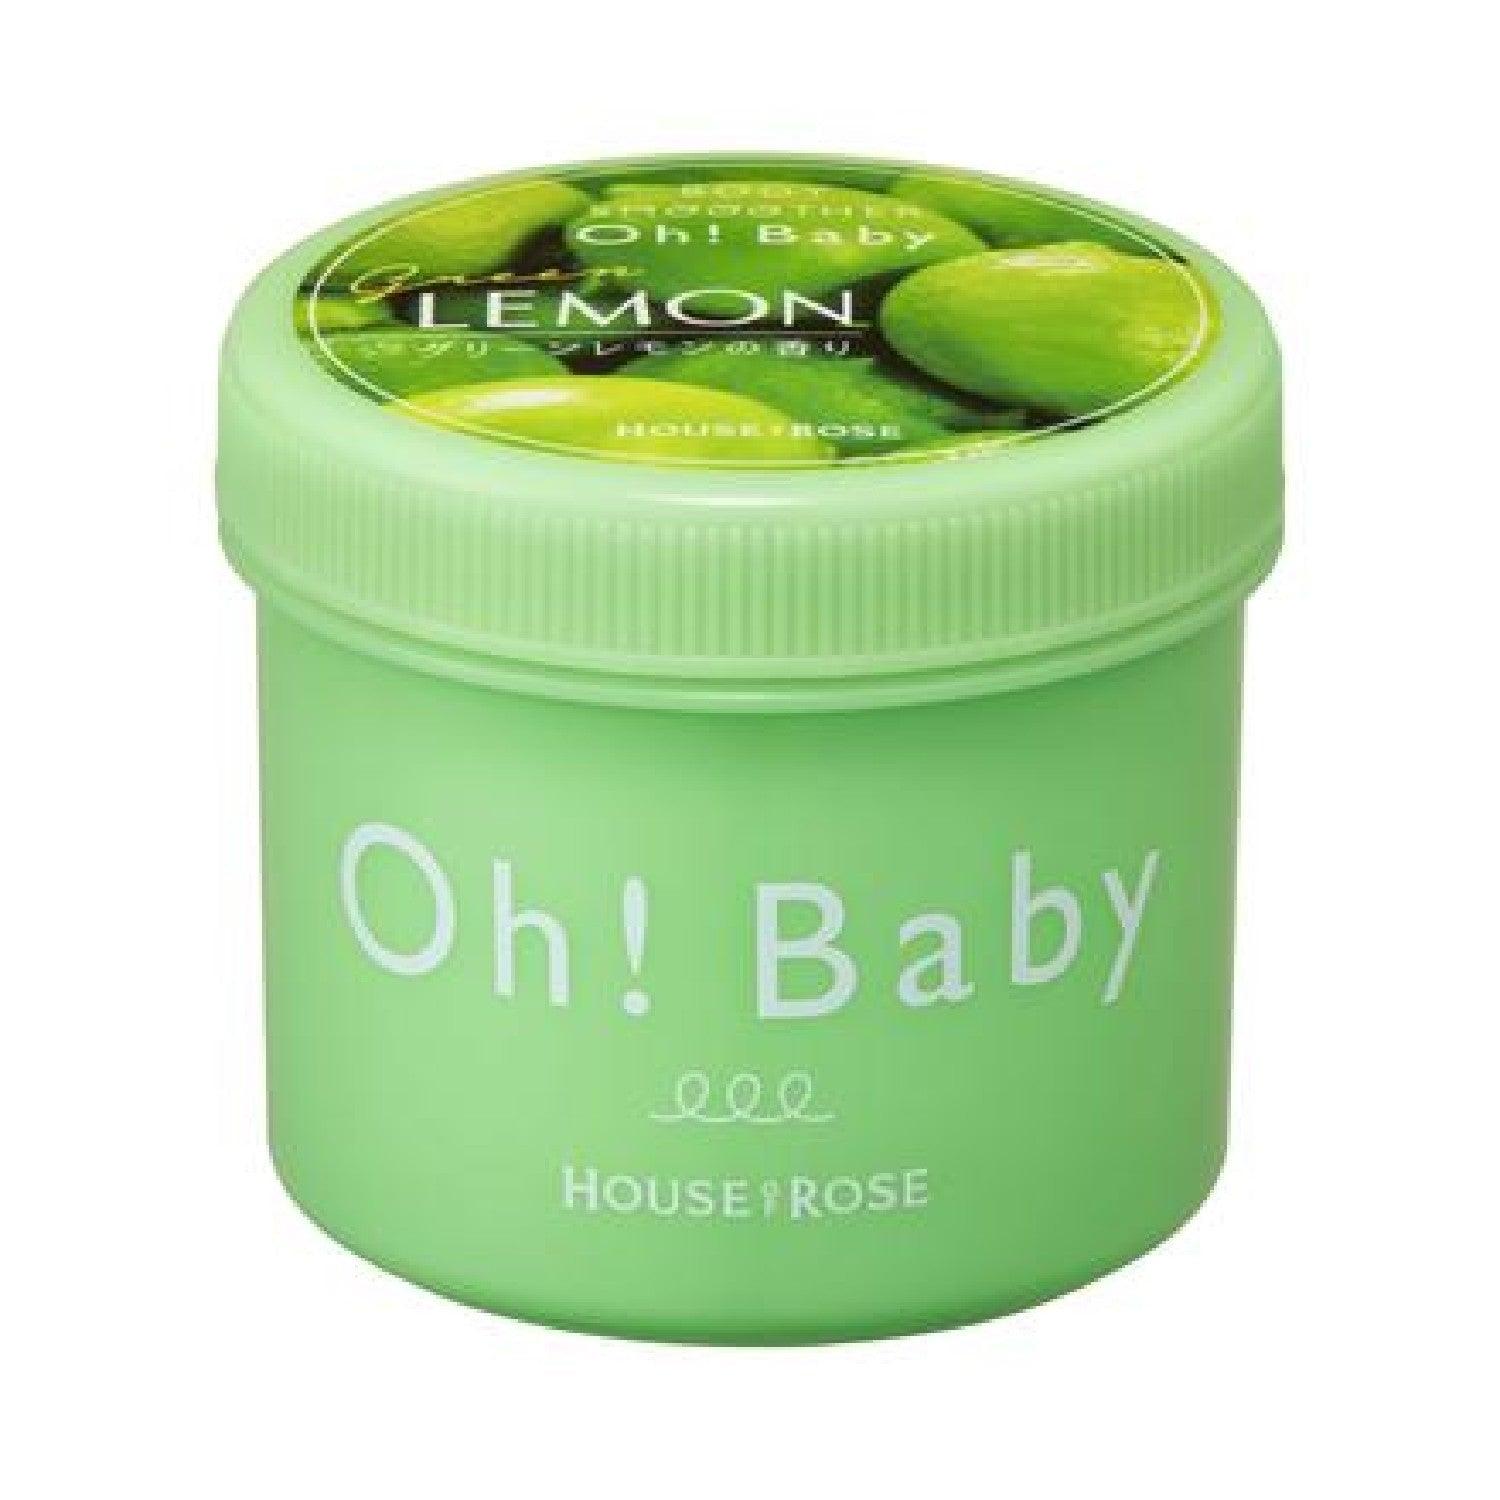 Fashion City House of Rose Original Oh Baby Body Smoother -20.1 oz